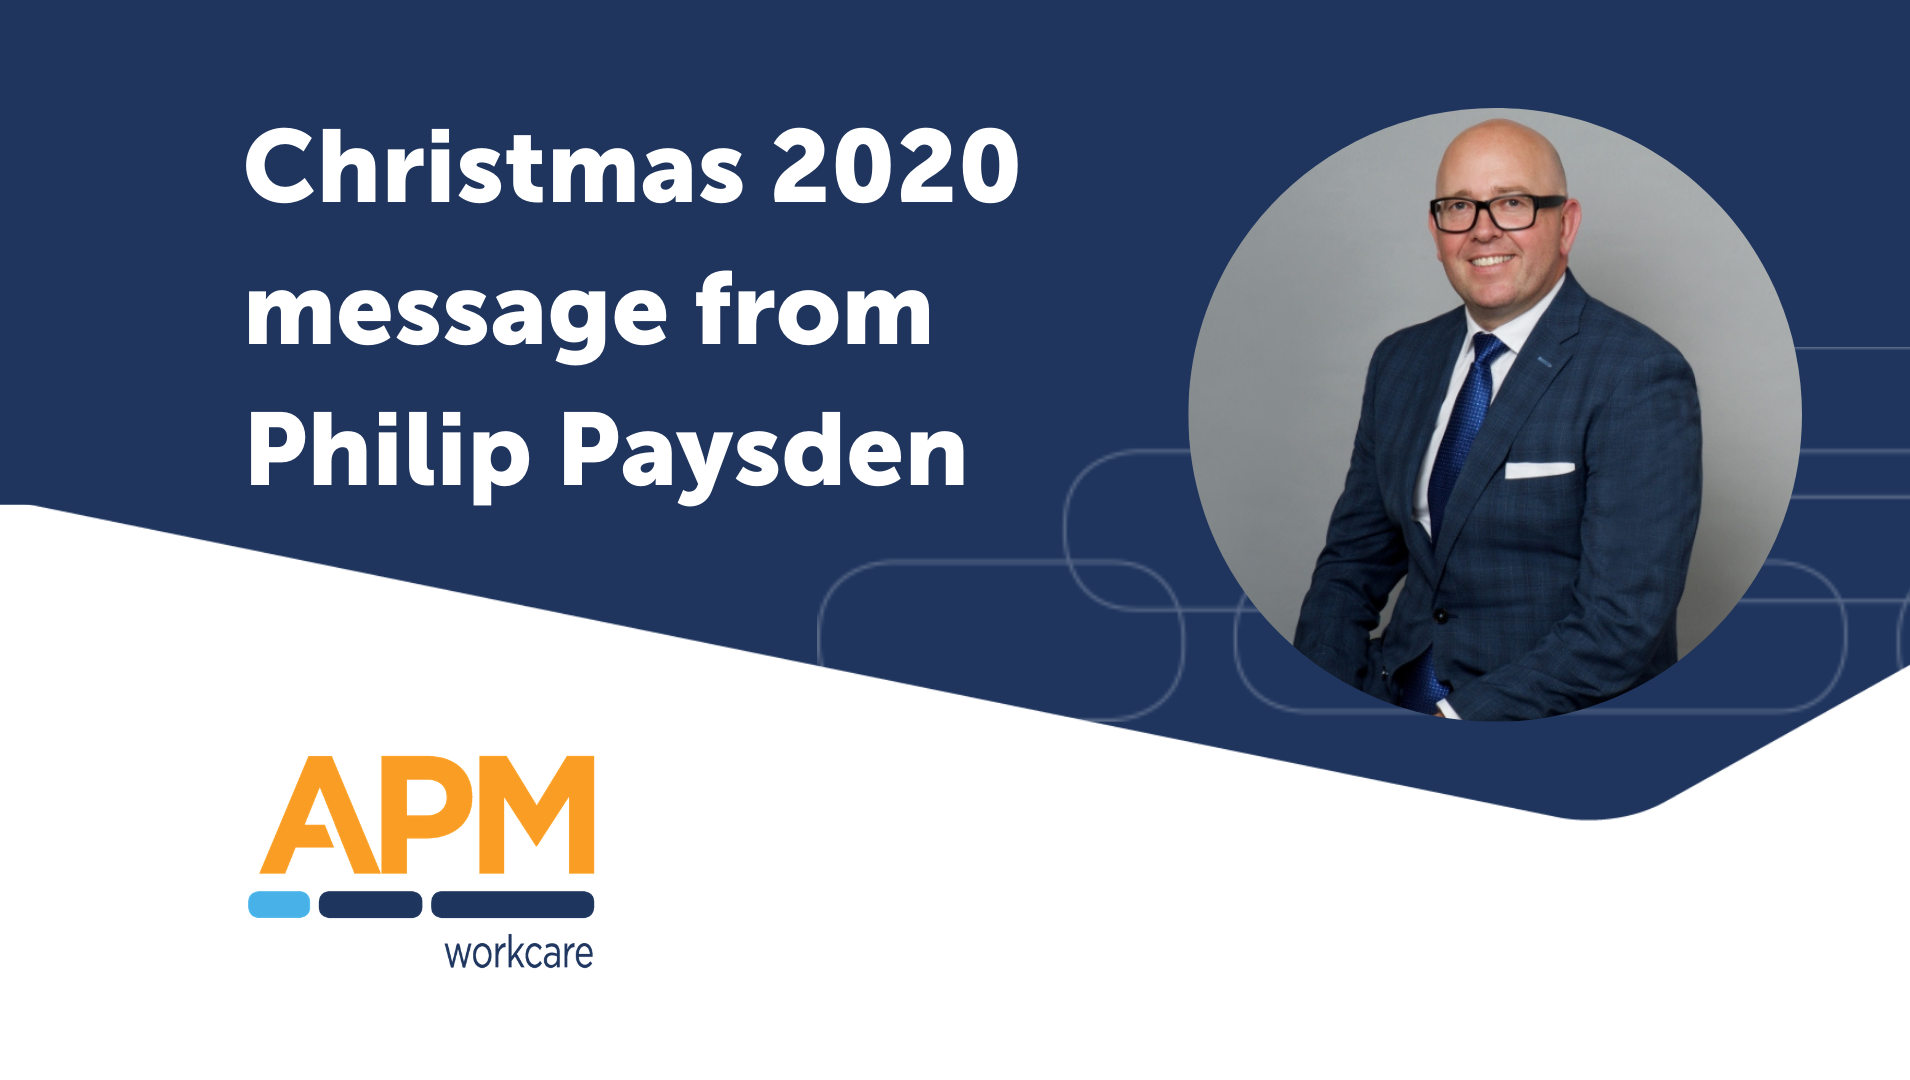 Christmas 2020 Message from Philip Paysden